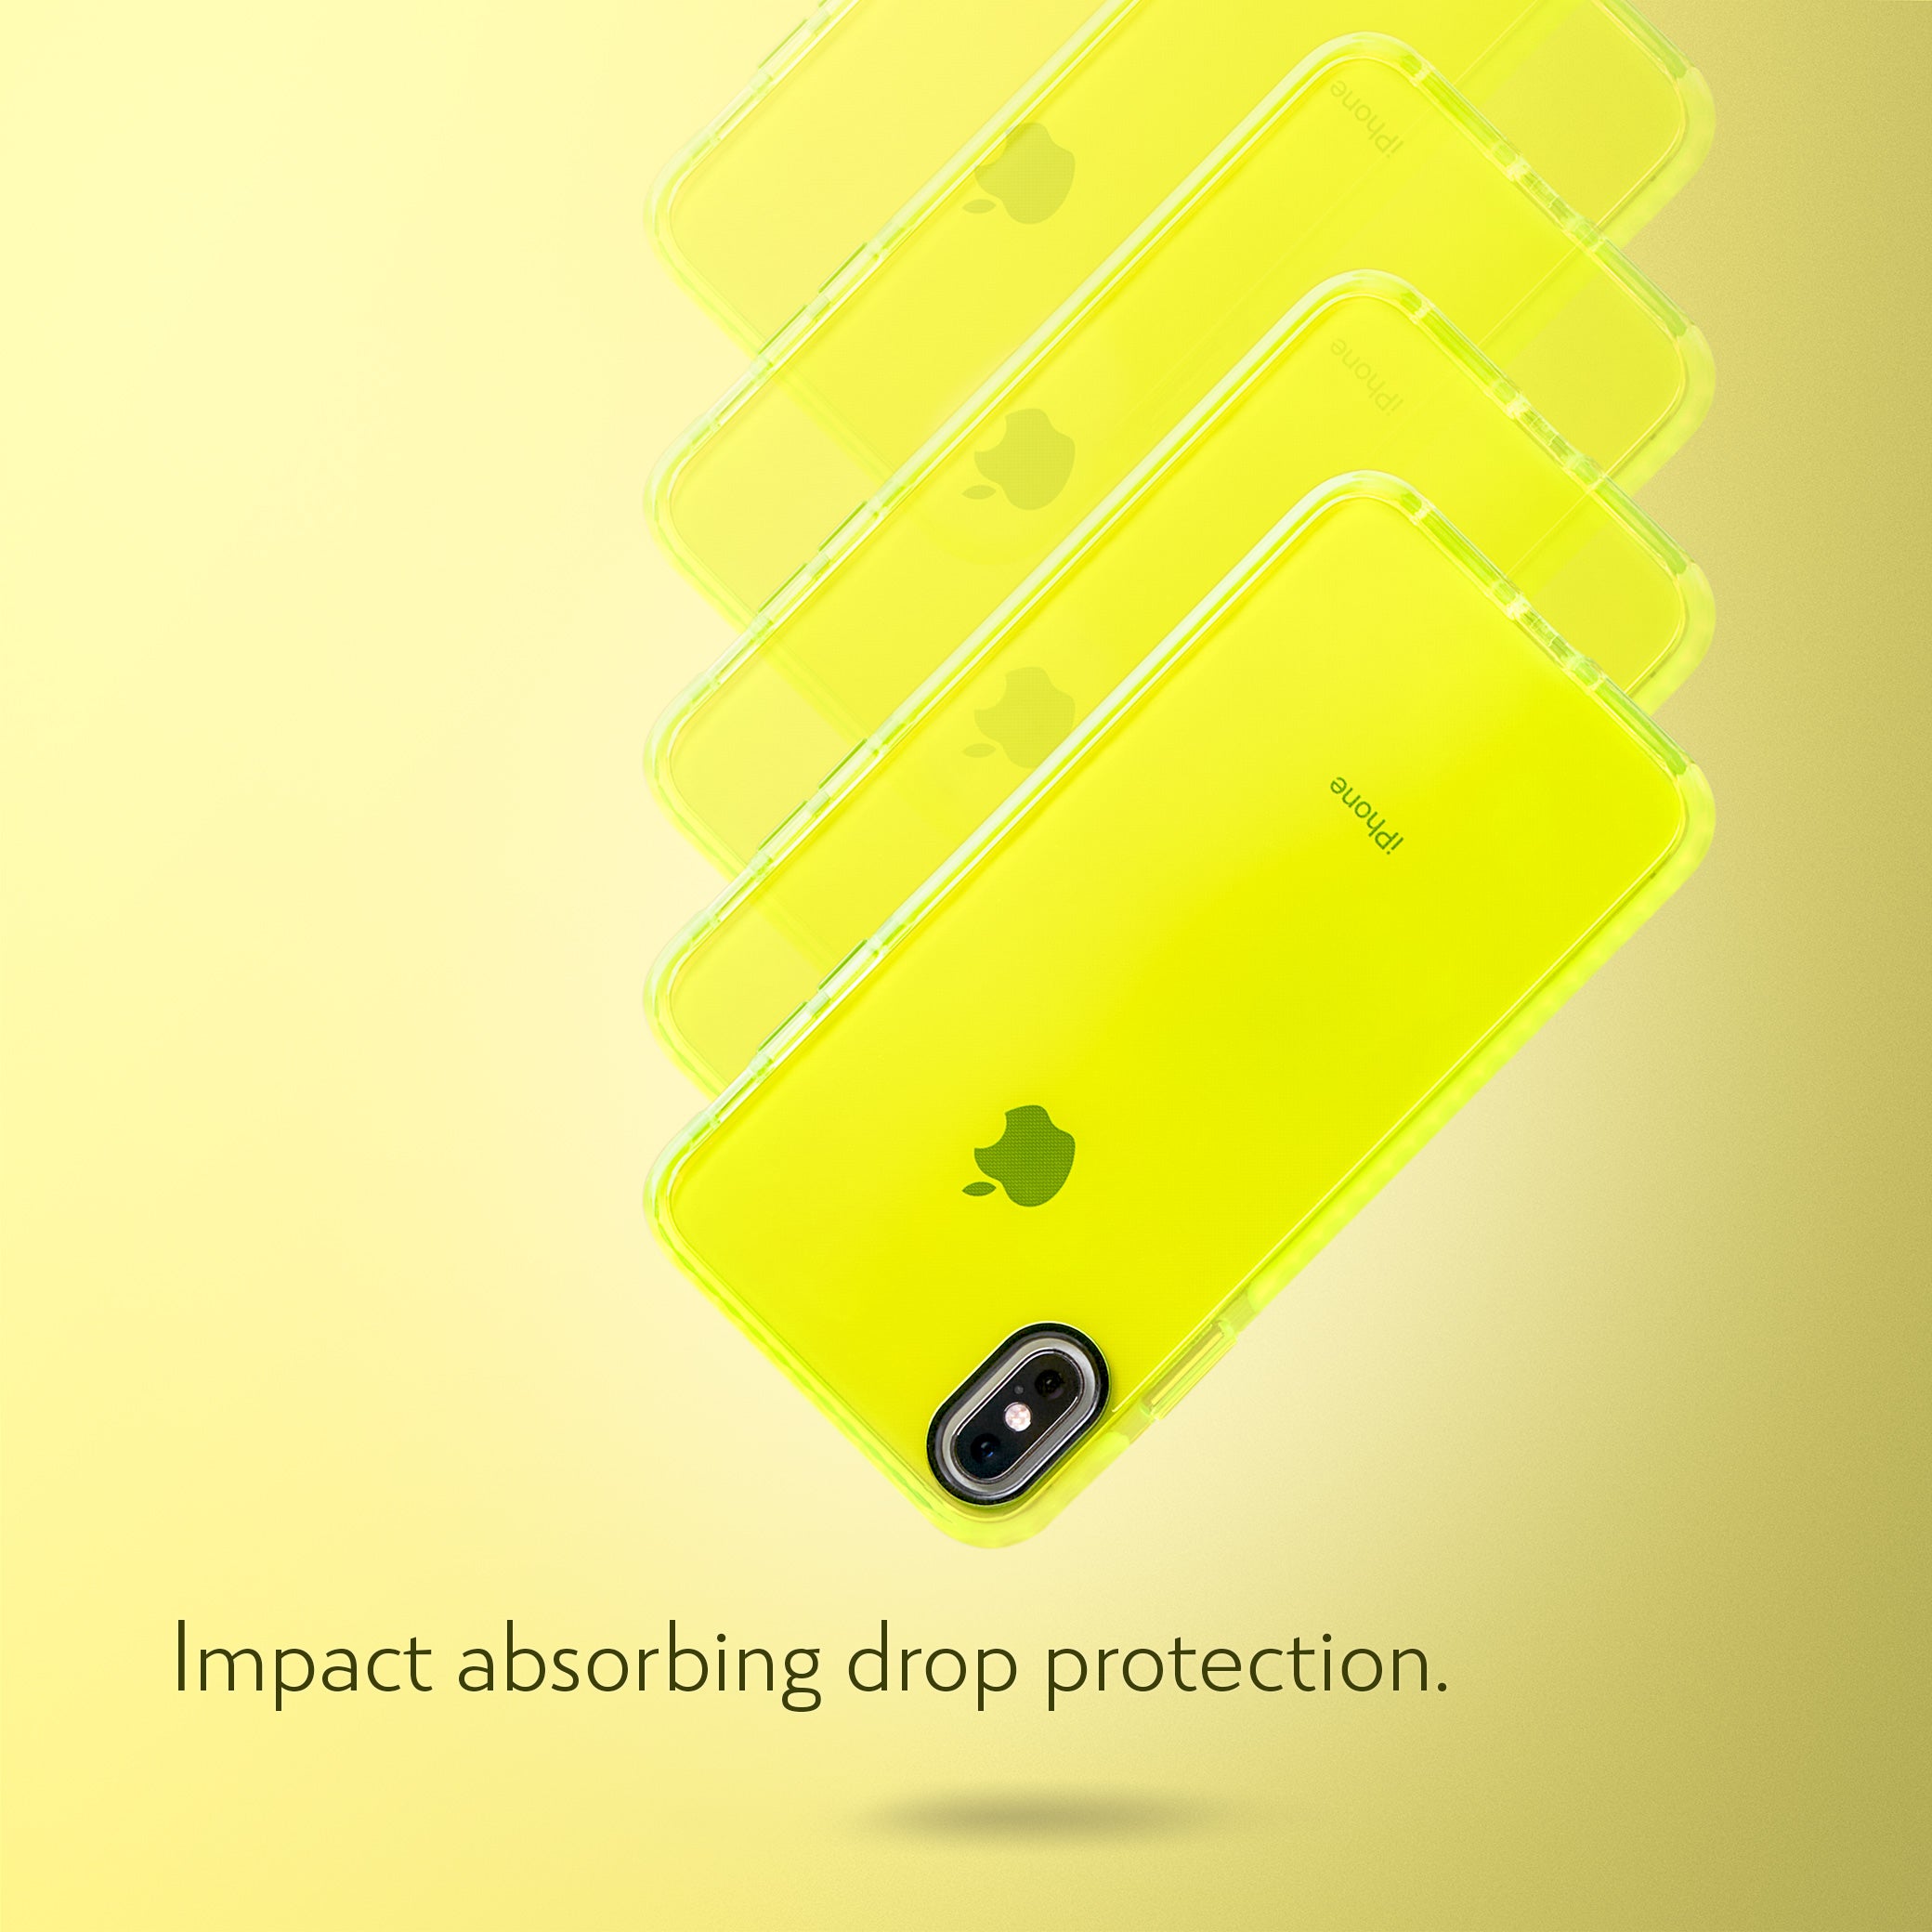 Barrier Case for iPhone Xs Max - Hi-Energy Neon Yellow